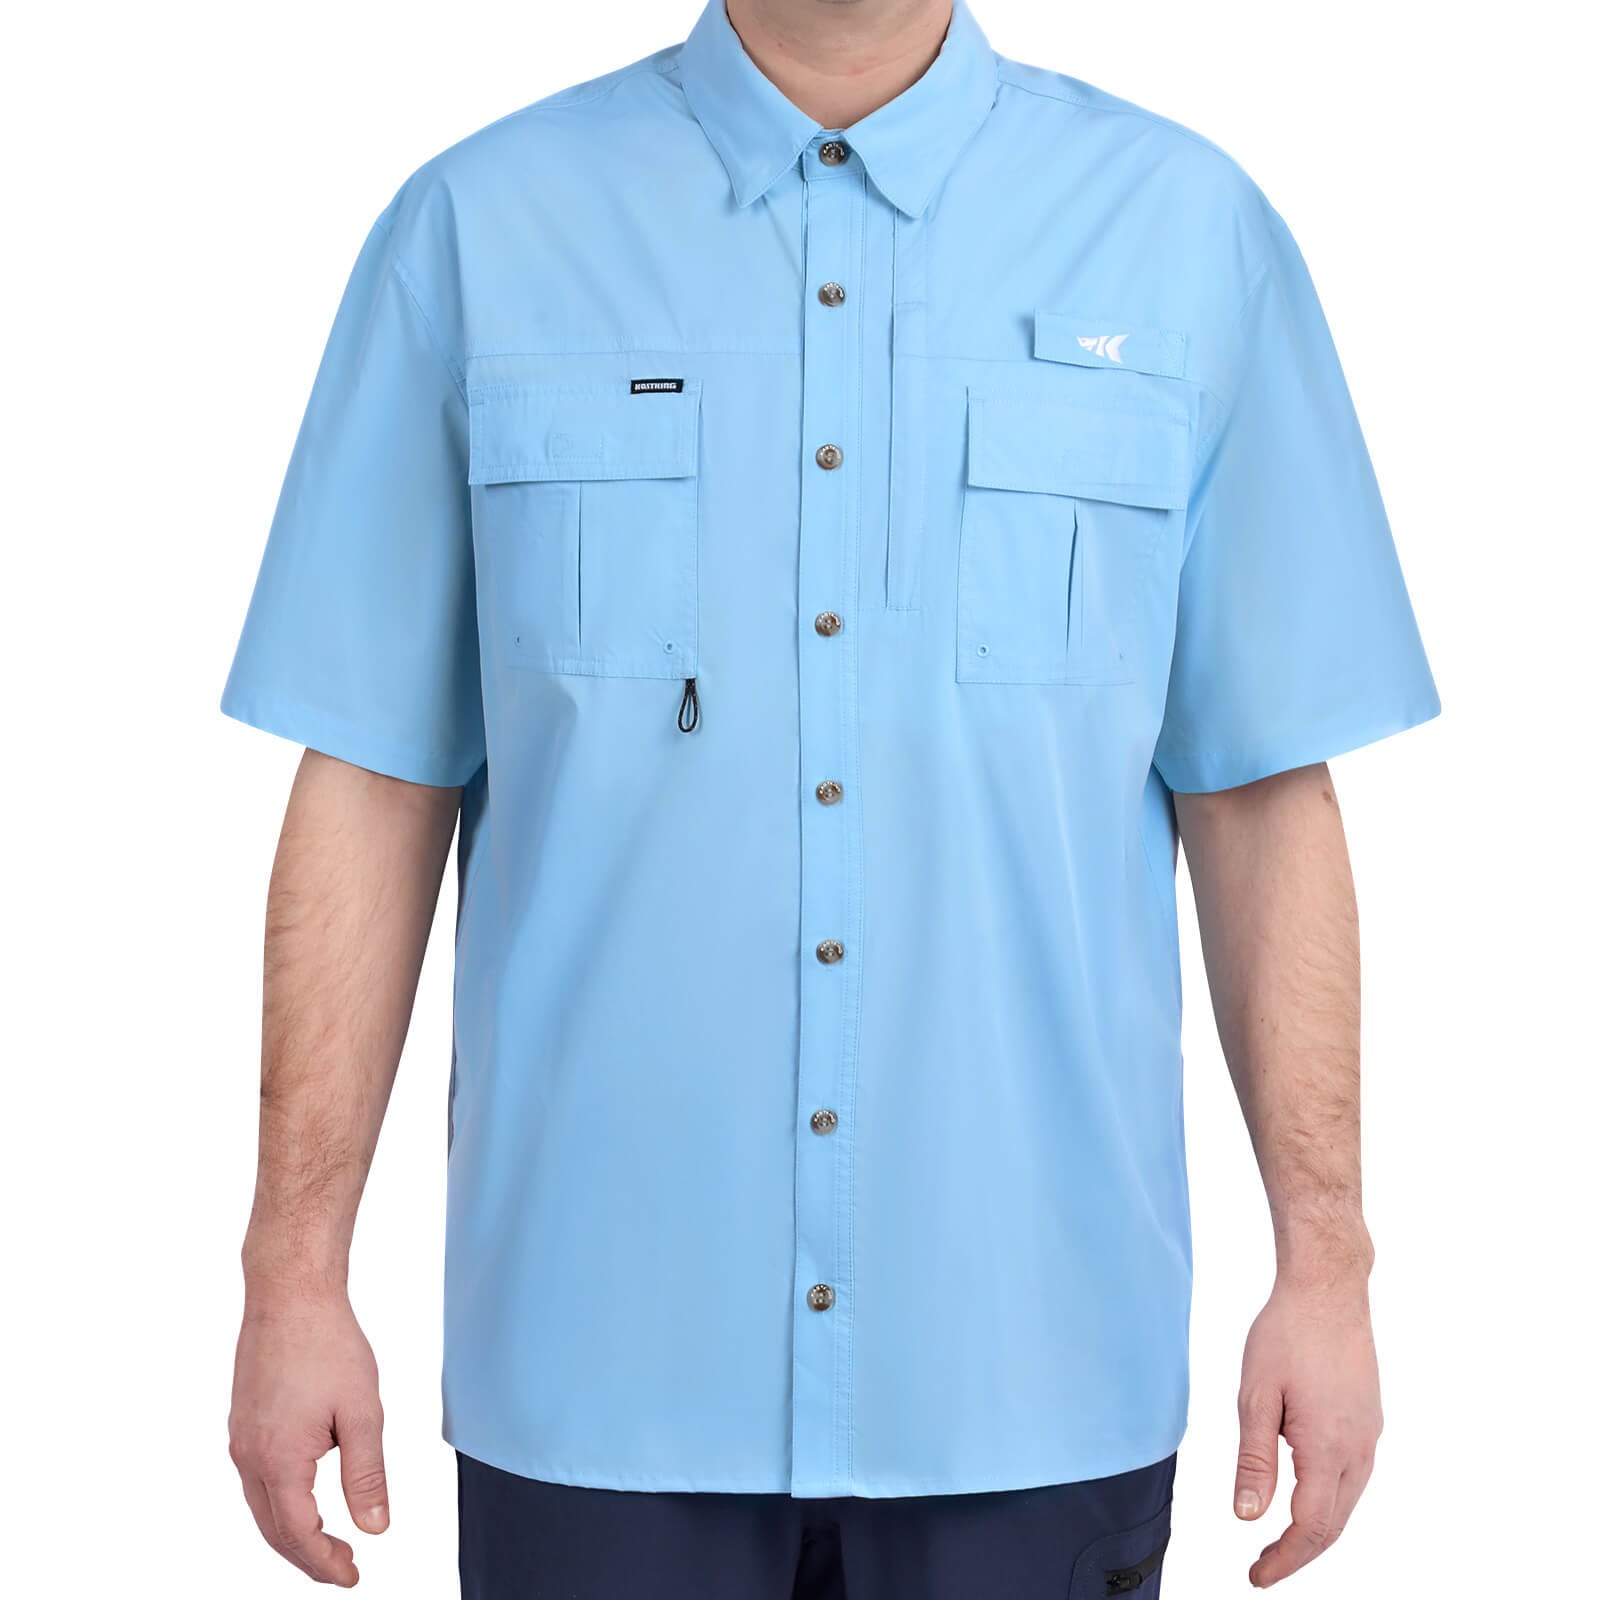 KastKing Casual Short Sleeve Button Down Shirts - Light Blue / X-Small